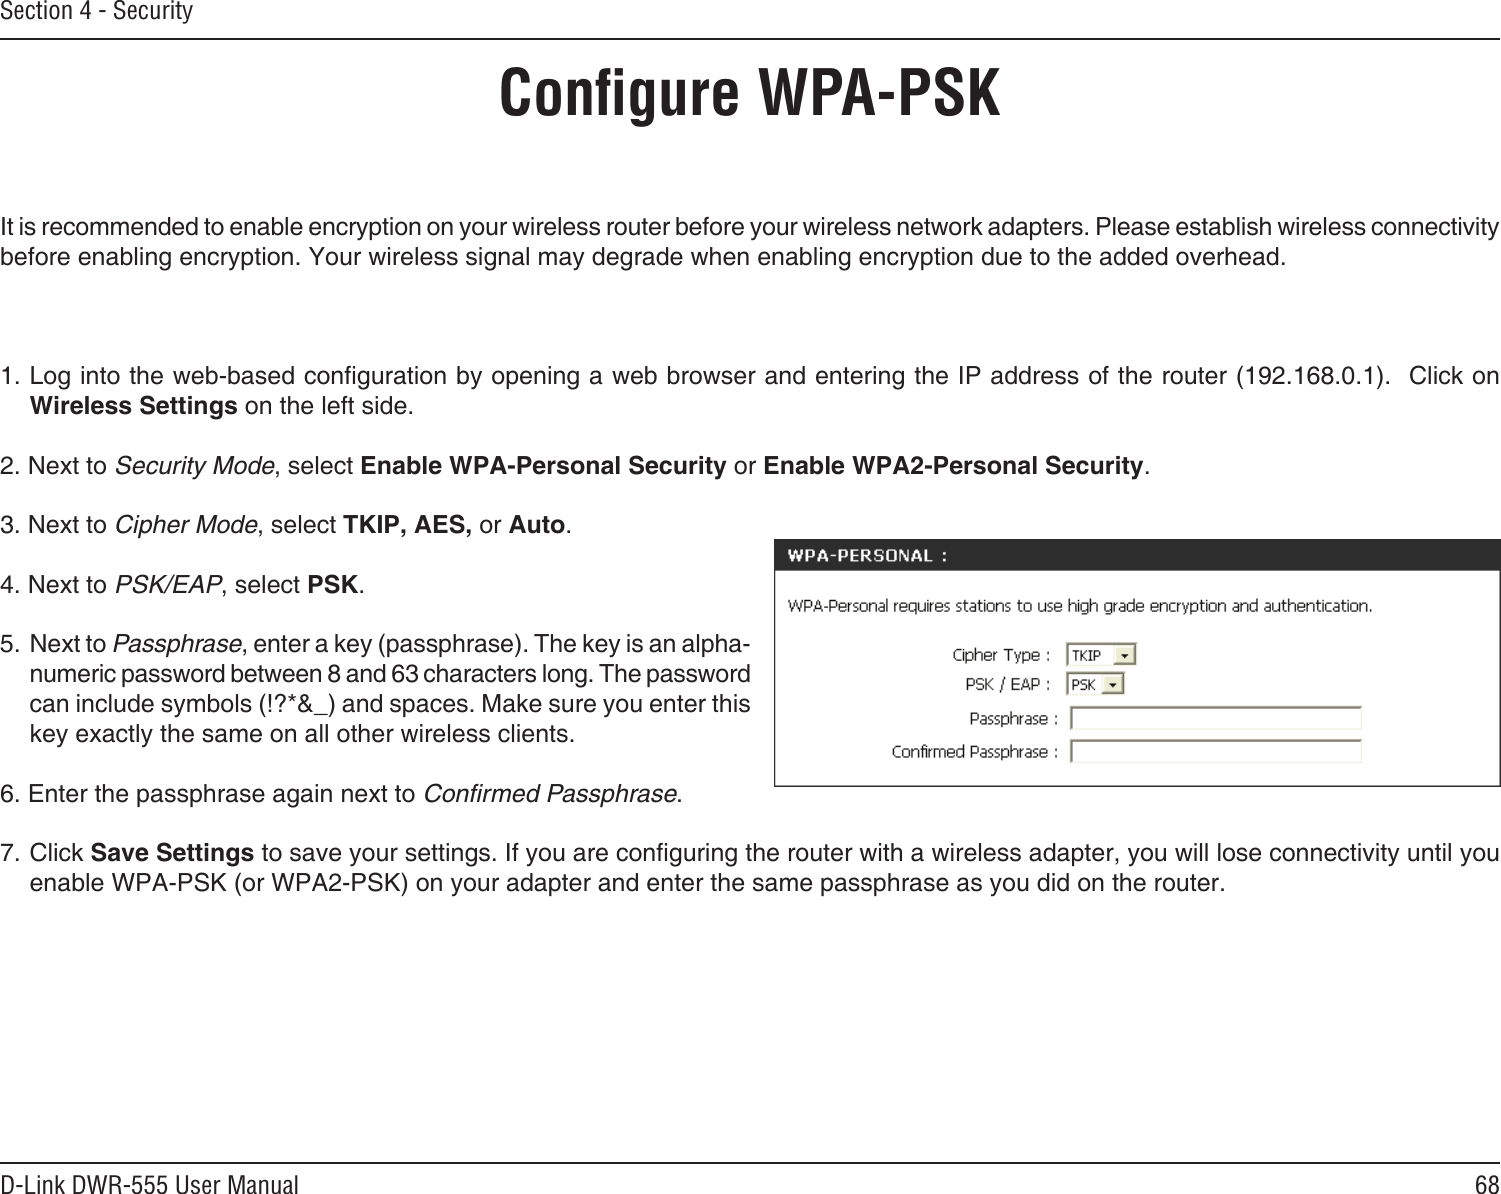 68D-Link DWR-555 User ManualSection 4 - SecurityConﬁgure WPA-PSKIt is recommended to enable encryption on your wireless router before your wireless network adapters. Please establish wireless connectivity before enabling encryption. Your wireless signal may degrade when enabling encryption due to the added overhead.1. Log into the web-based conguration by opening a web browser and entering the IP address of the router (192.168.0.1).  Click on Wireless Settings on the left side.2. Next to Security Mode, select Enable WPA-Personal Security or Enable WPA2-Personal Security.3. Next to Cipher Mode, select TKIP, AES, or Auto.4. Next to PSK/EAP, select PSK.5. Next to Passphrase, enter a key (passphrase). The key is an alpha-numeric password between 8 and 63 characters long. The password can include symbols (!?*&amp;_) and spaces. Make sure you enter this key exactly the same on all other wireless clients.6. Enter the passphrase again next to Conﬁrmed Passphrase.7. Click Save Settings to save your settings. If you are conguring the router with a wireless adapter, you will lose connectivity until you enable WPA-PSK (or WPA2-PSK) on your adapter and enter the same passphrase as you did on the router.